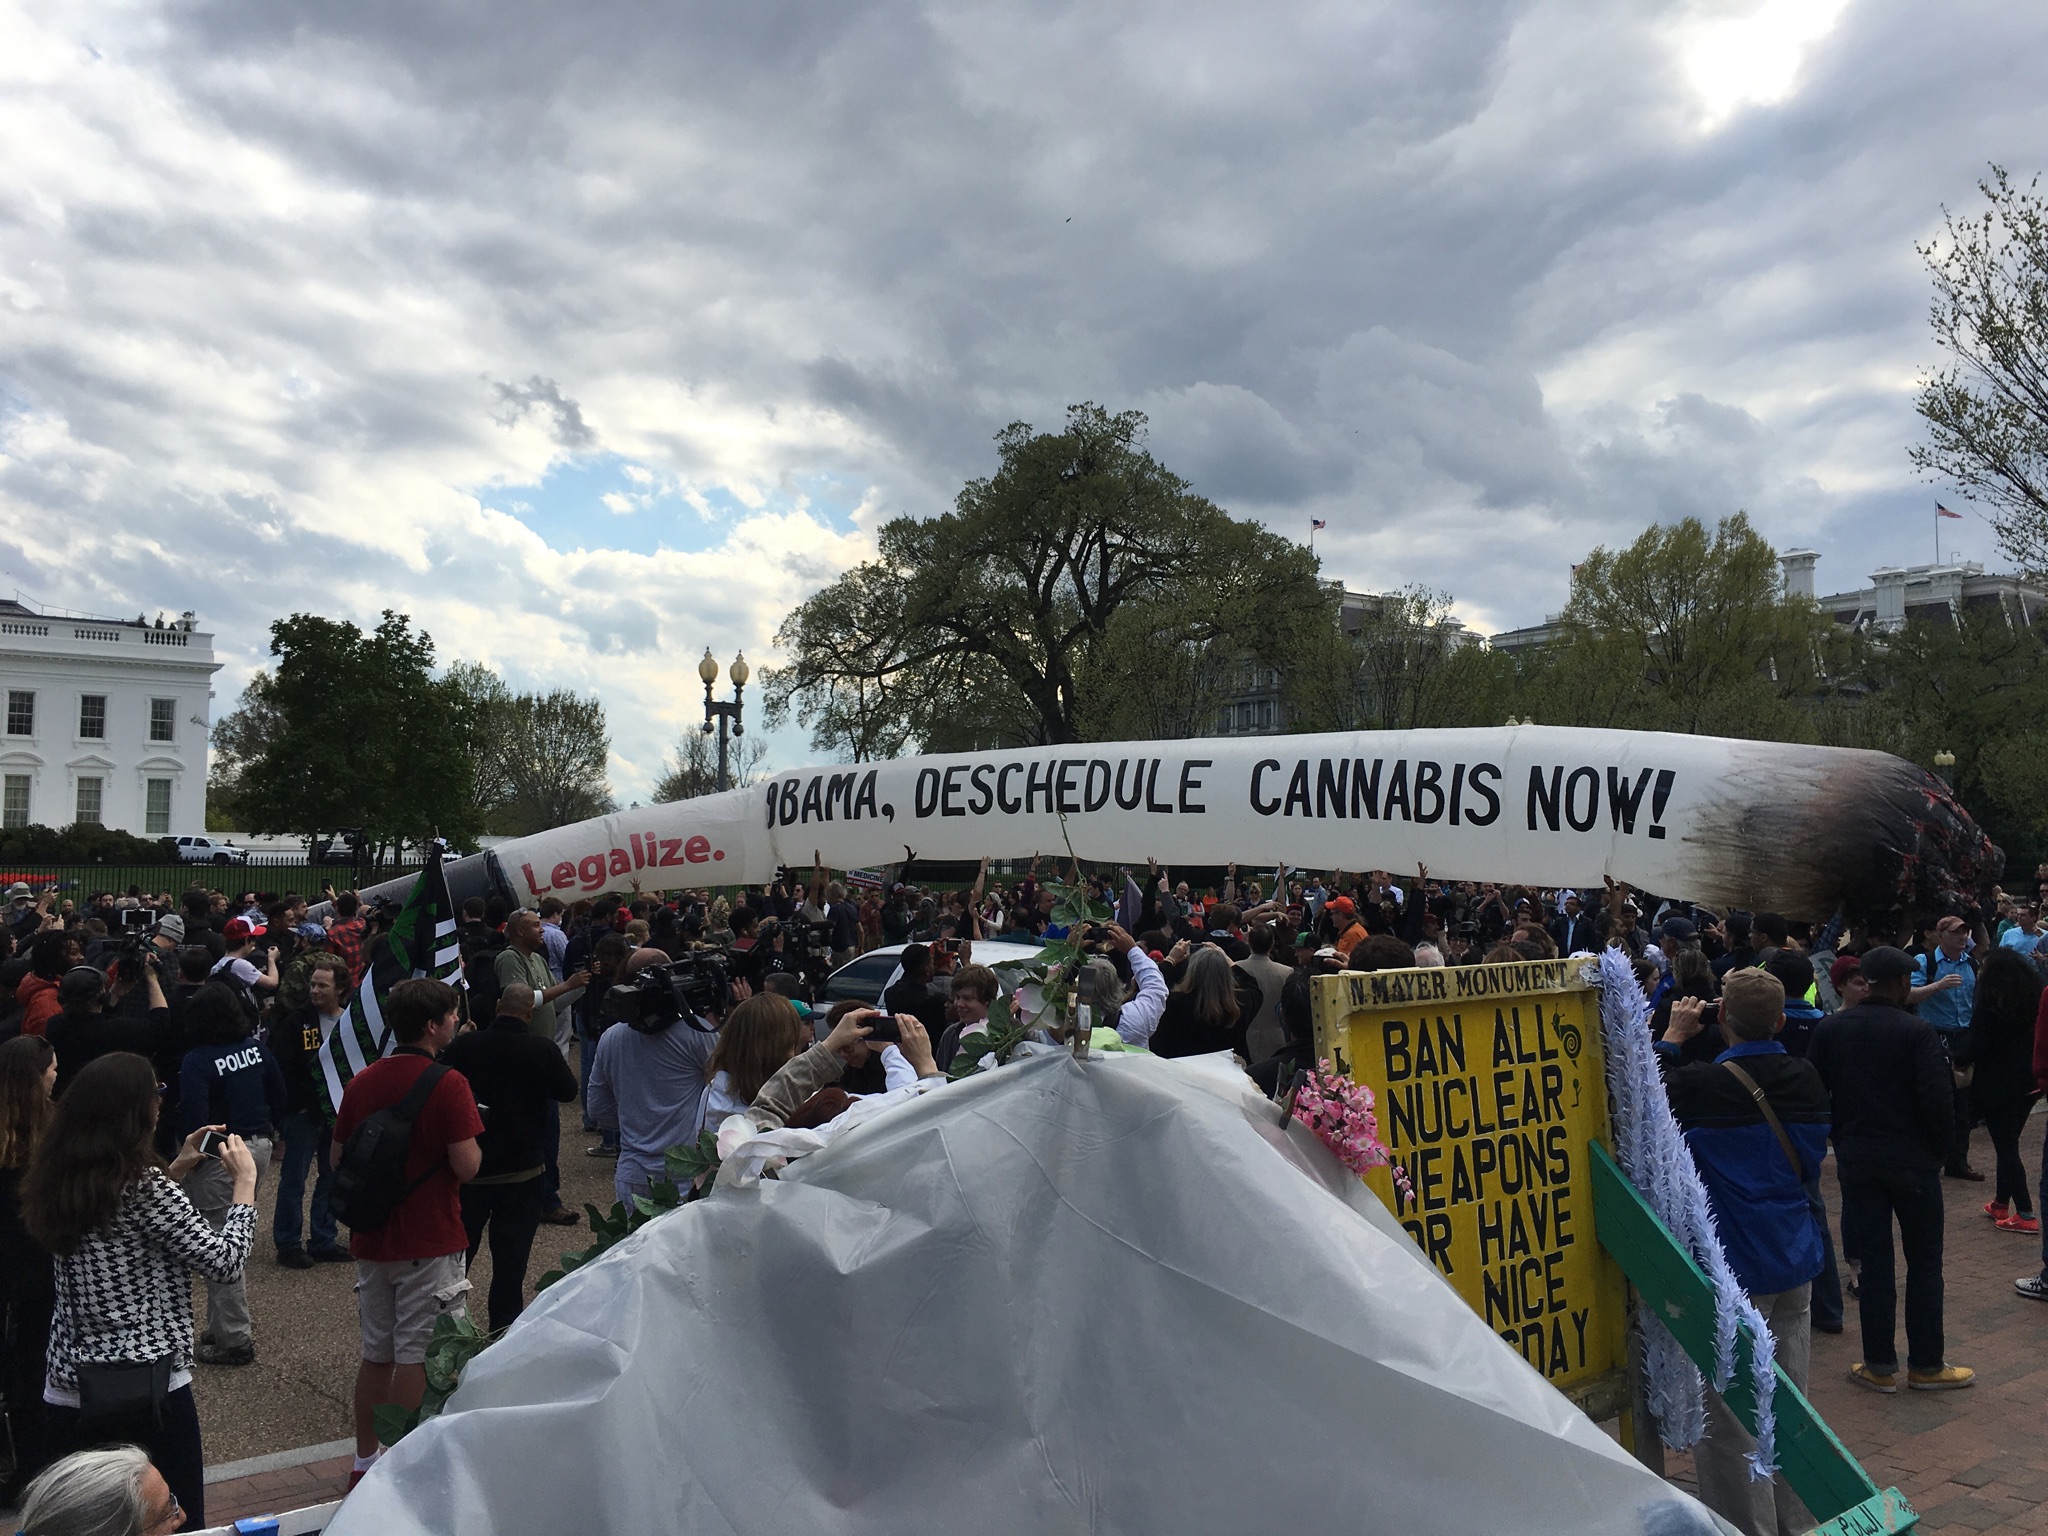 Pot activists bring 51-foot ‘joint’ to White House protest (Photos)